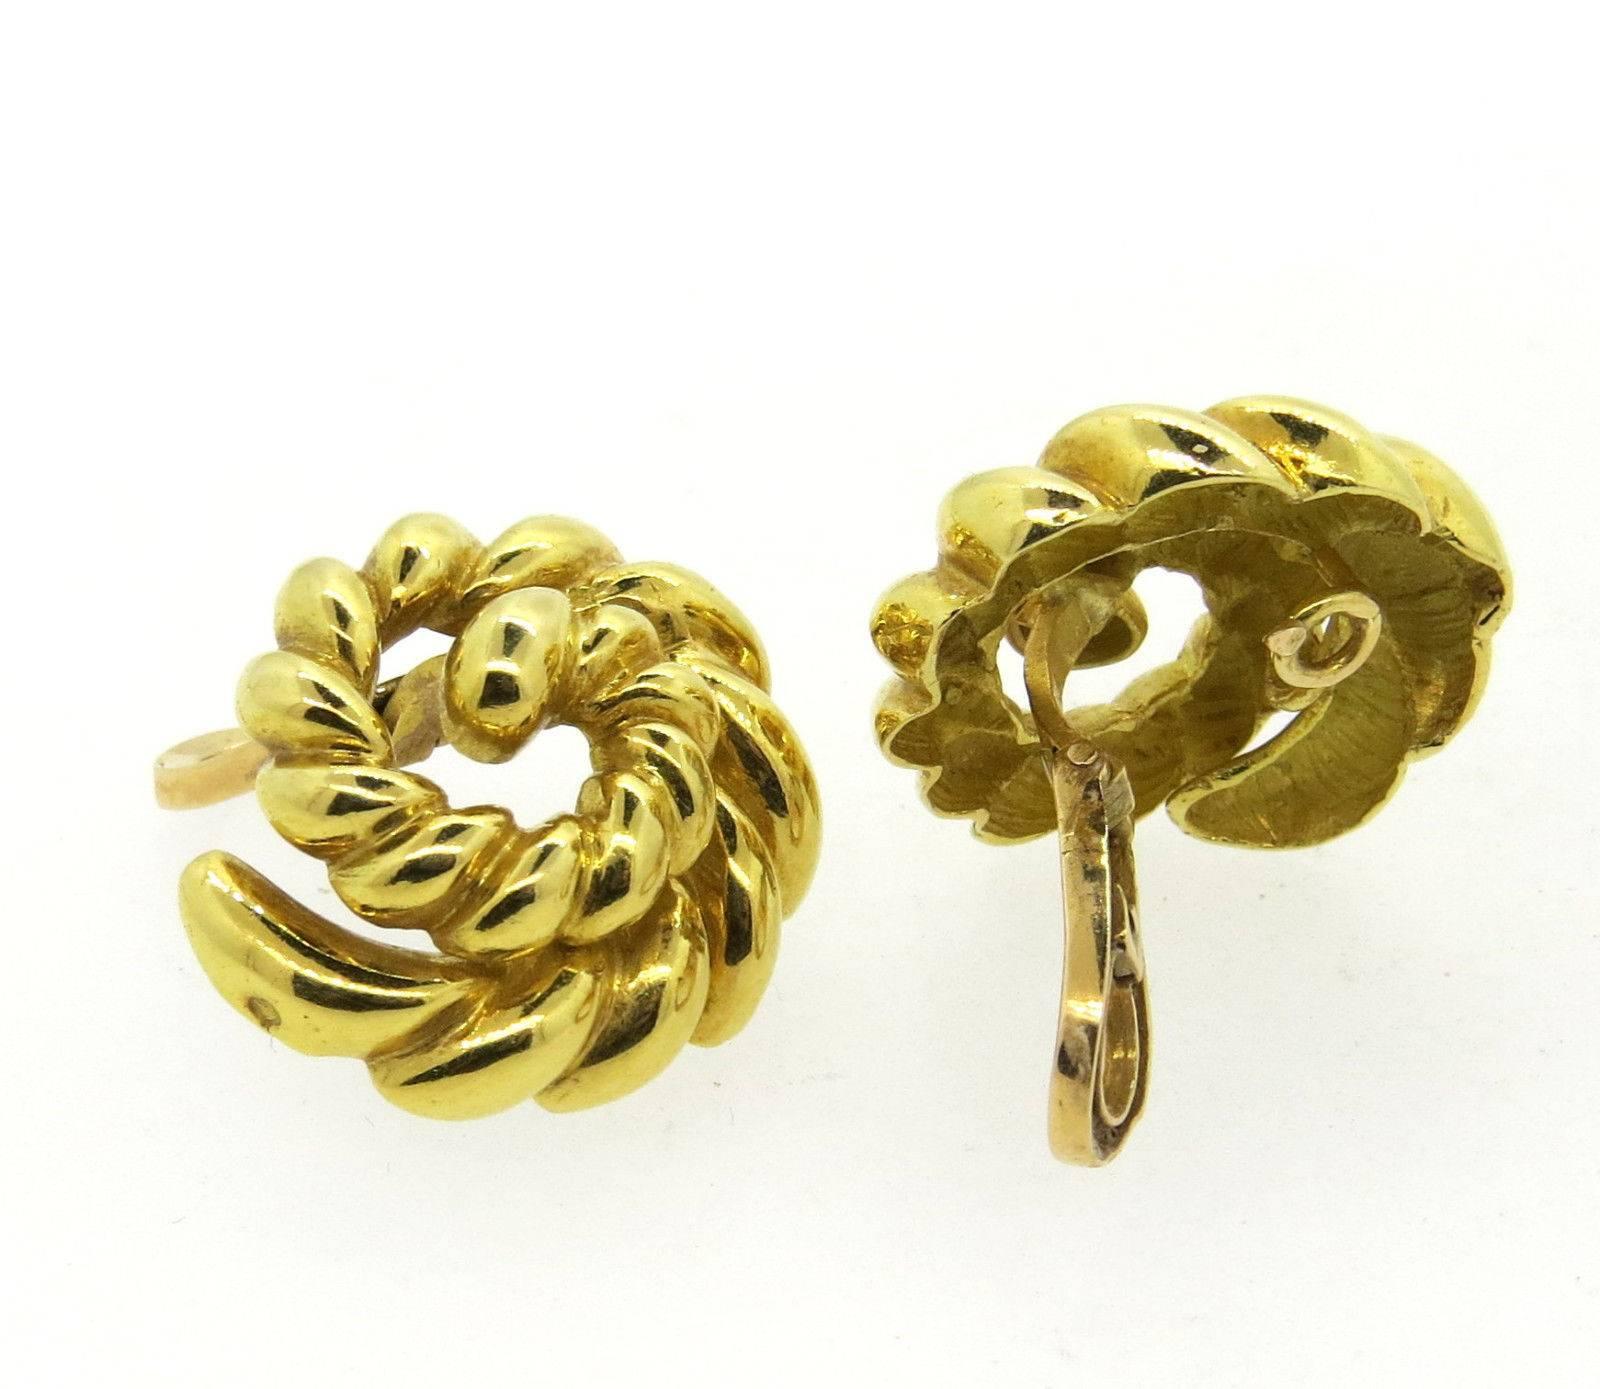 A pair of 18k yellow gold earrings in a swirl motif.  The earrings are 25mm in diameter and weigh 19.3 grams.